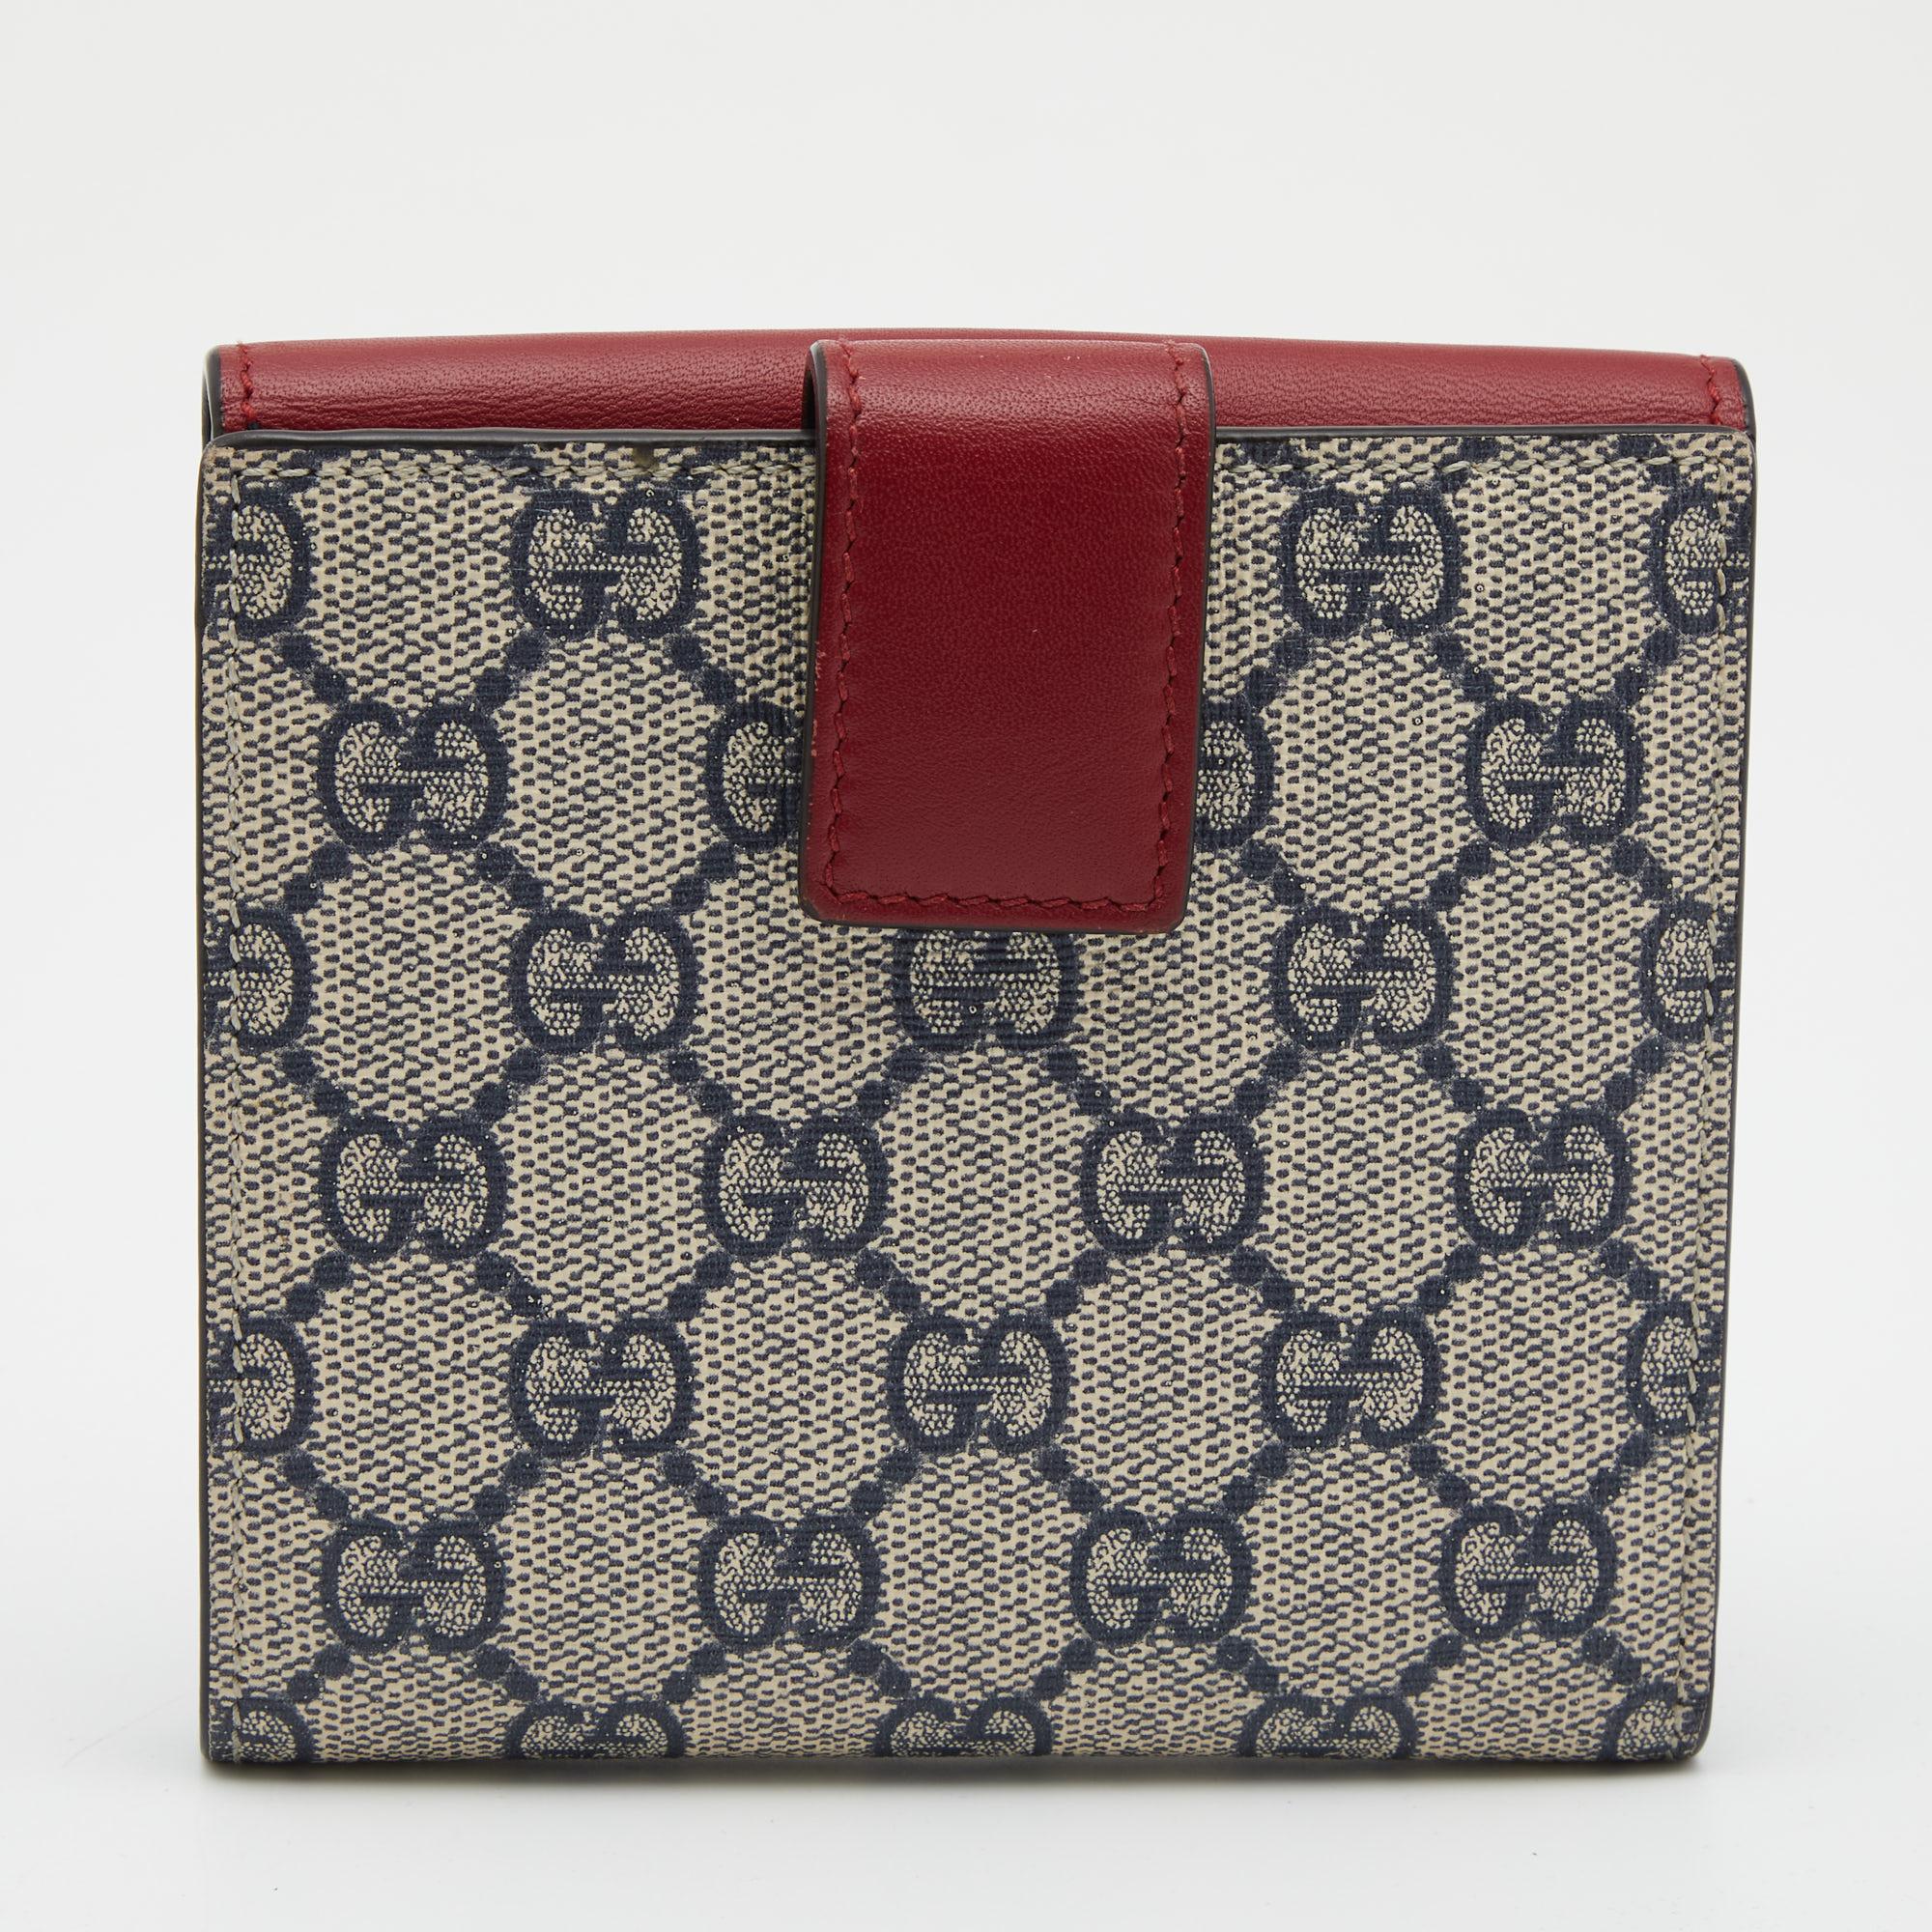 Bringing a blend of remarkable fashion and fine craftsmanship is this wallet from Gucci. The red and blue wallet comes crafted from GG Supreme canvas and is styled with leather trims as well as a Web bow detail on the front. It has a smooth interior